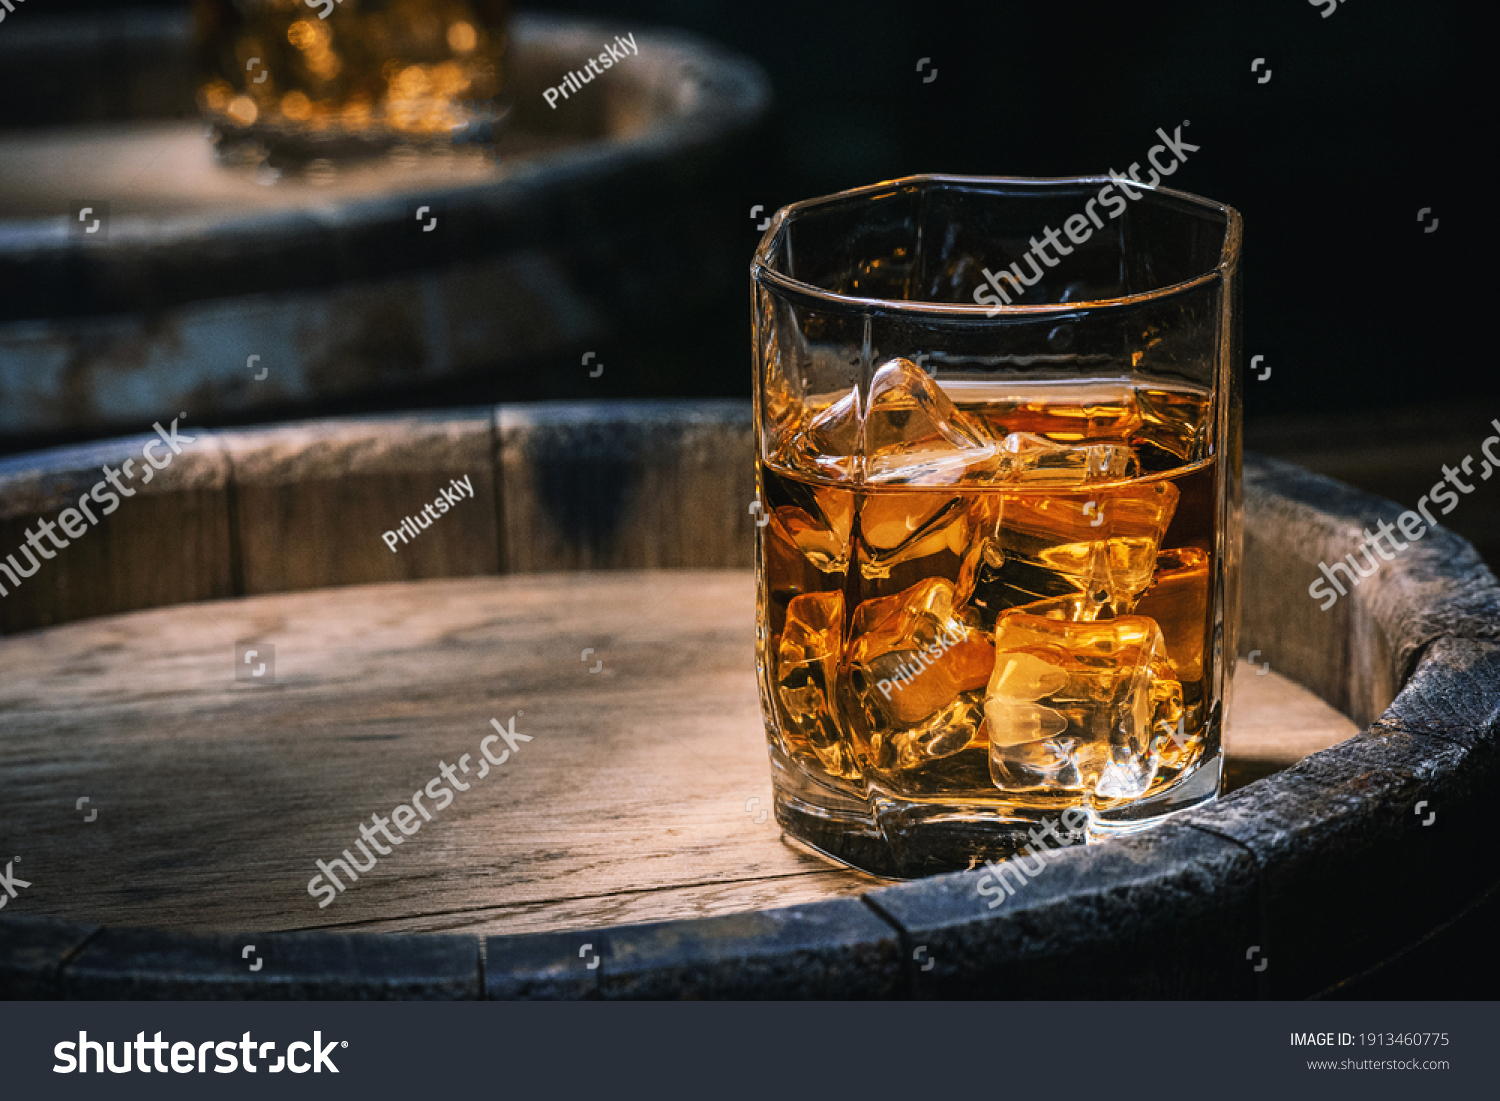 Bottle and glass of whiskey with ice on a wooden background. Glass of Scotch whiskey and ice sits on top of a rustic whiskey barrel. Whiskey with ice. #1913460775